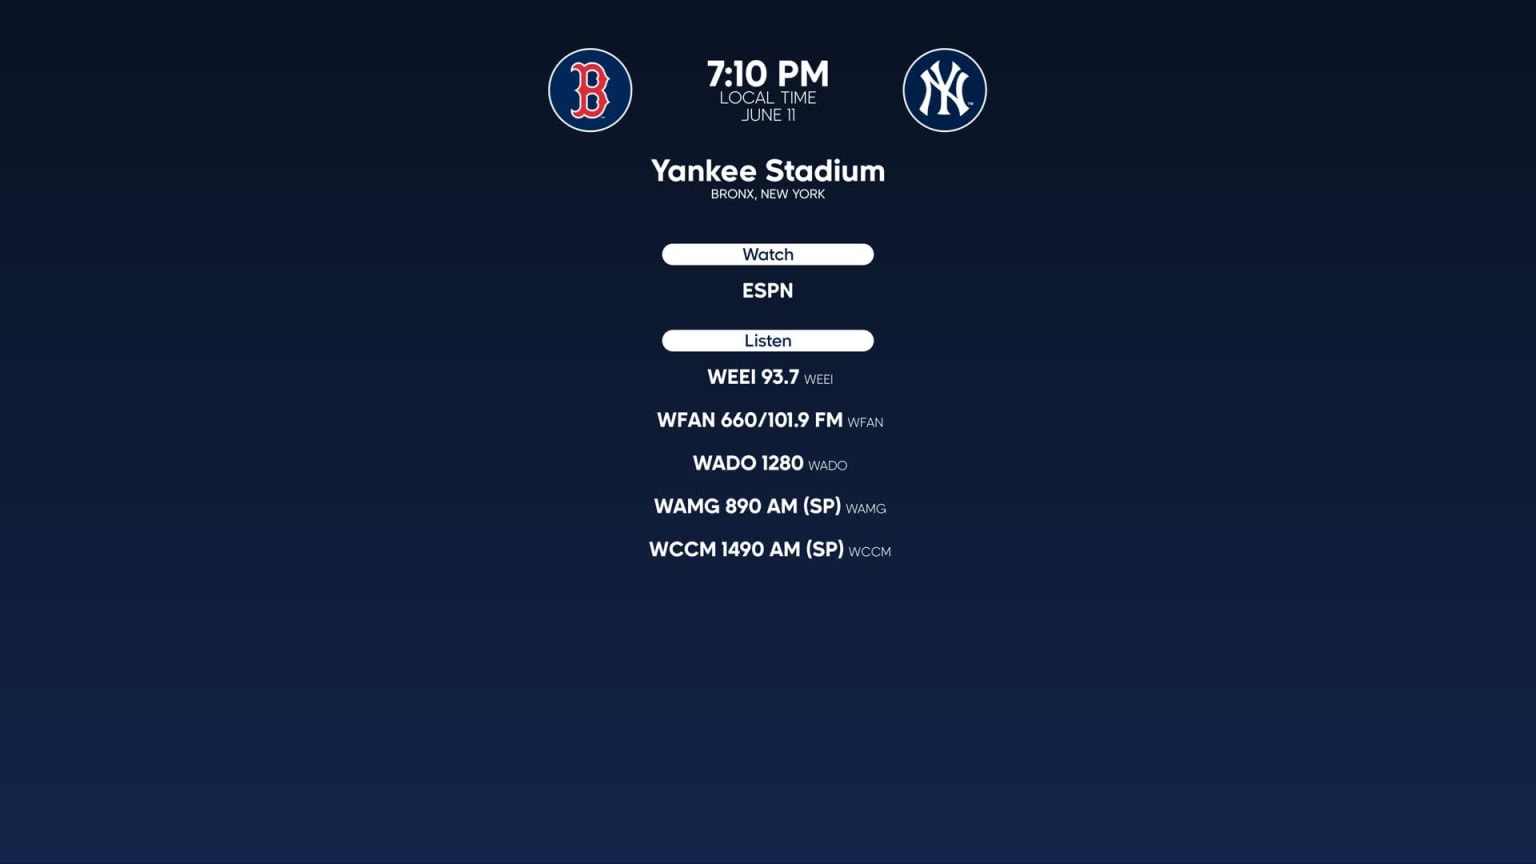 Red Sox vs. Yankees lineups forJune 11